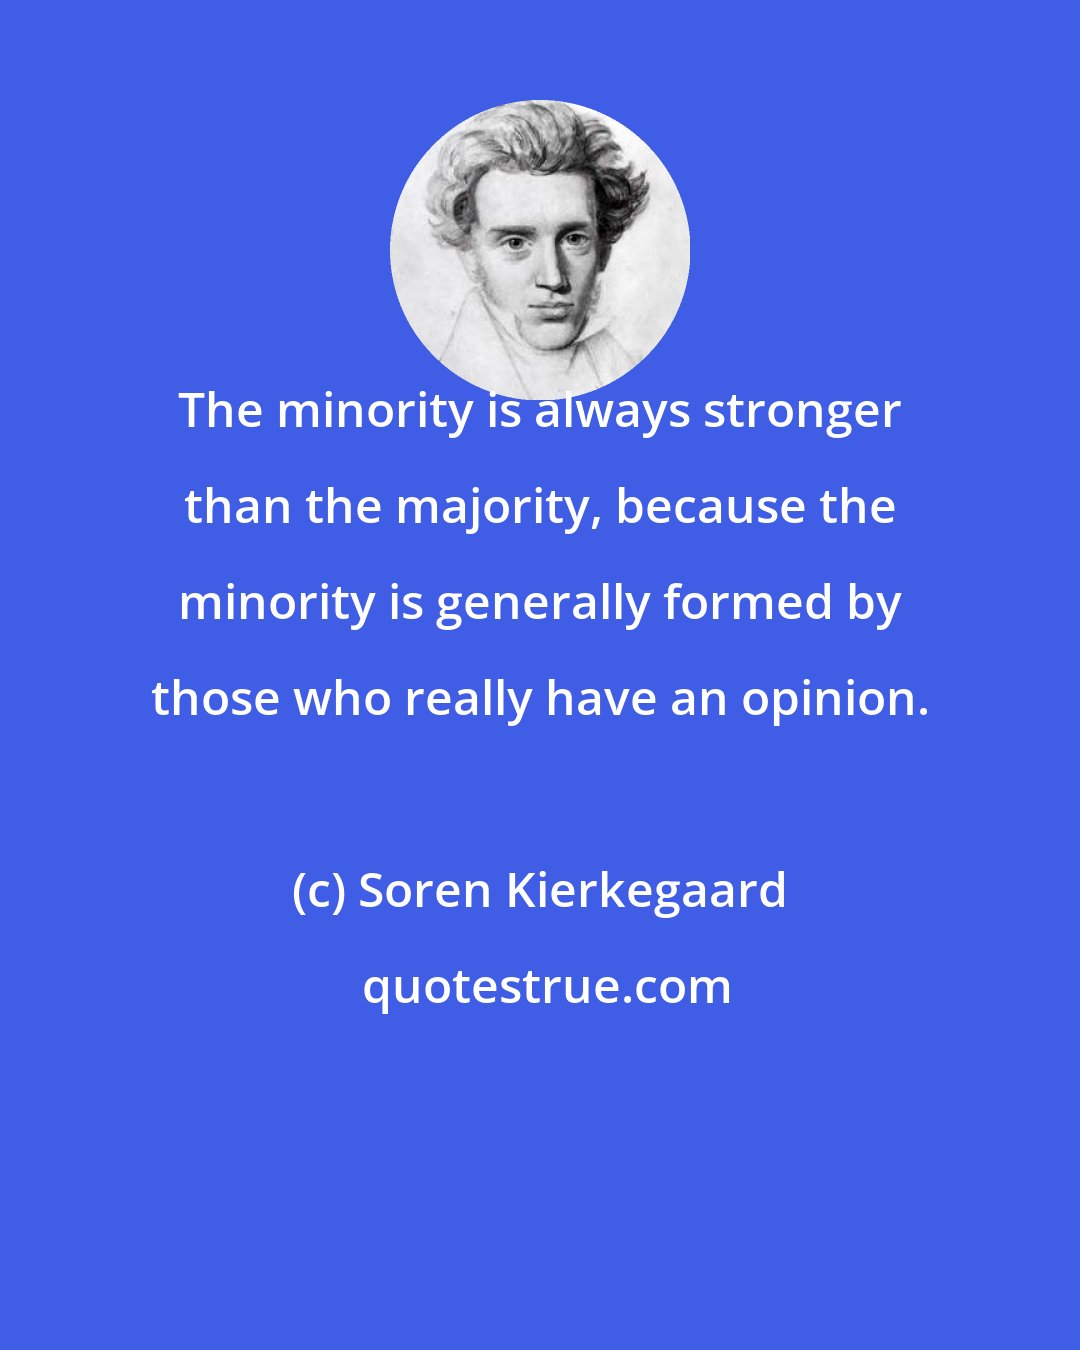 Soren Kierkegaard: The minority is always stronger than the majority, because the minority is generally formed by those who really have an opinion.